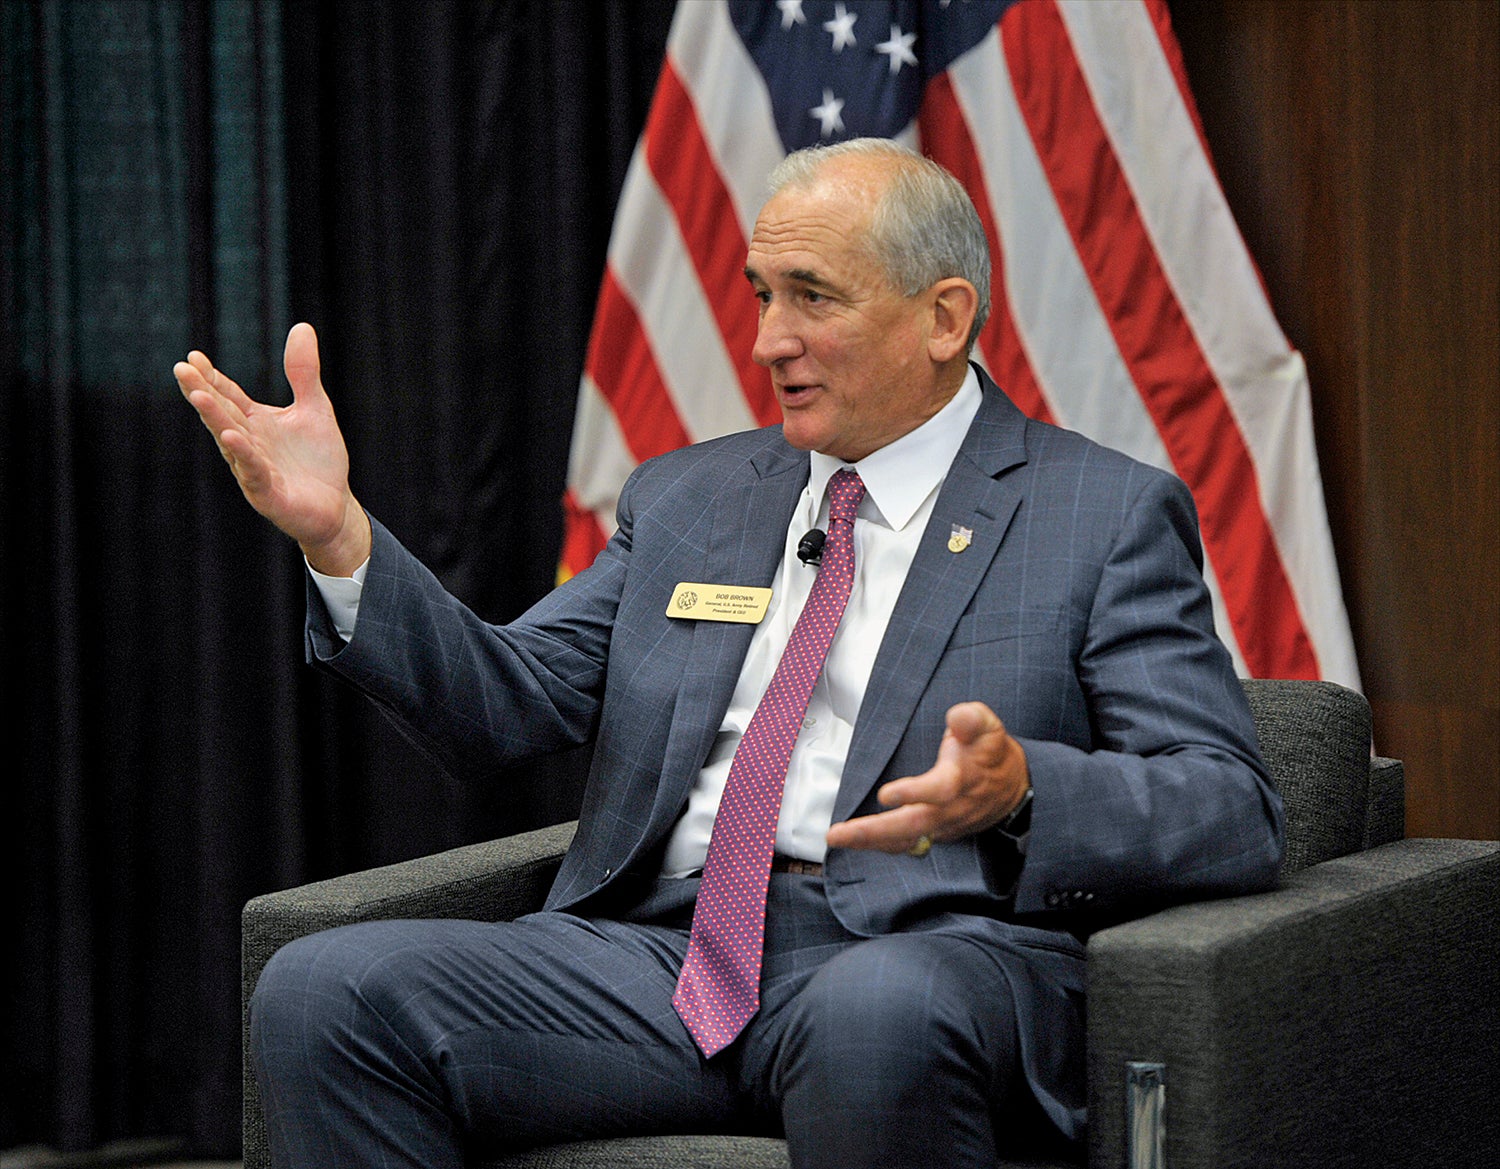 Retired Gen. Bob Brown, president and CEO of the Association of the U.S. Army, speaks at a Coffee Series event at AUSA headquarters in Arlington, Virginia. (Credit: AUSA/Luc Dunn)